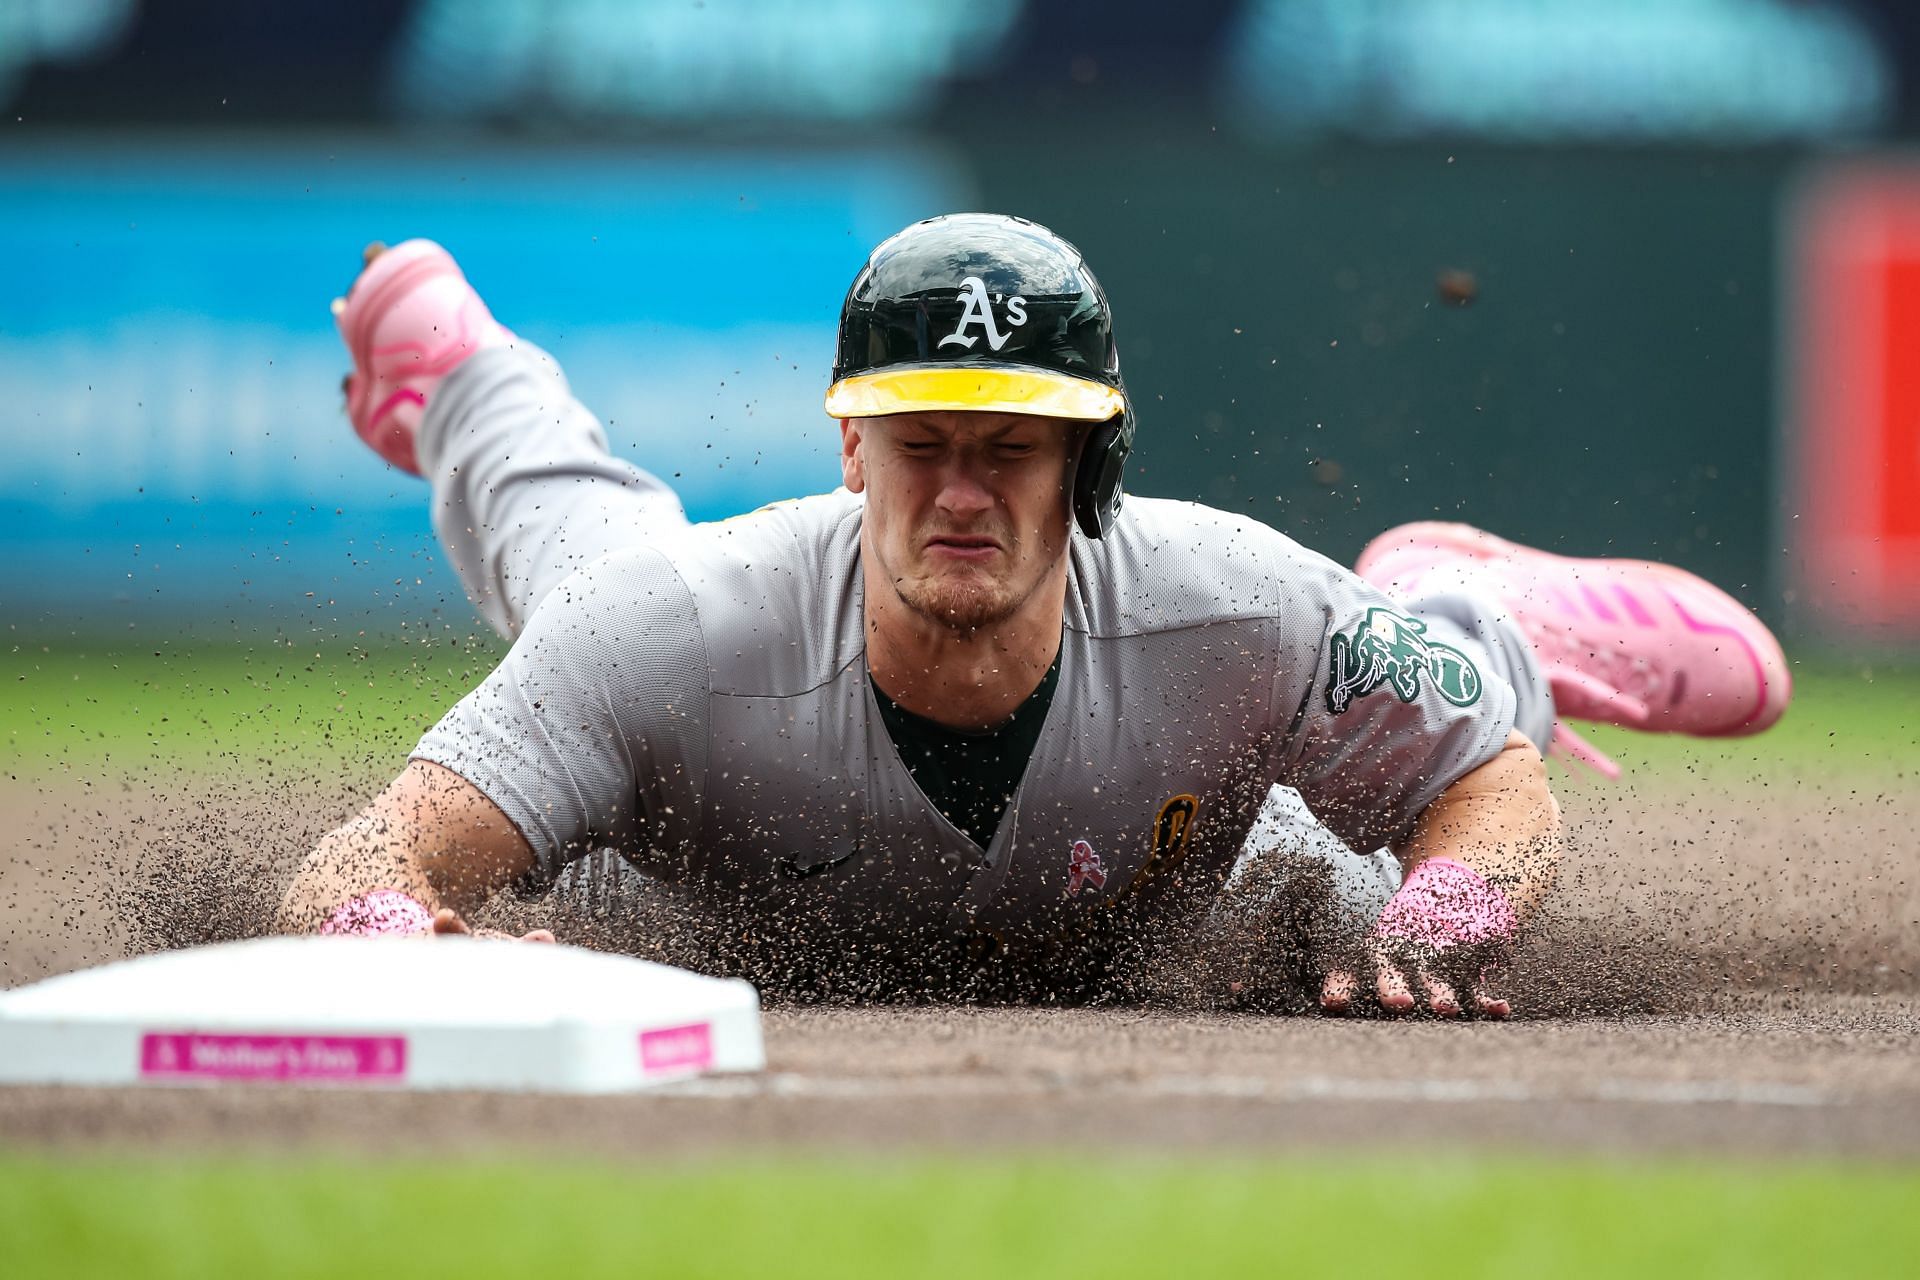 Oakland Athletics catcher Sean Murphy is the most productive offensive player on the Oakland Athletics with an OPS of .712.